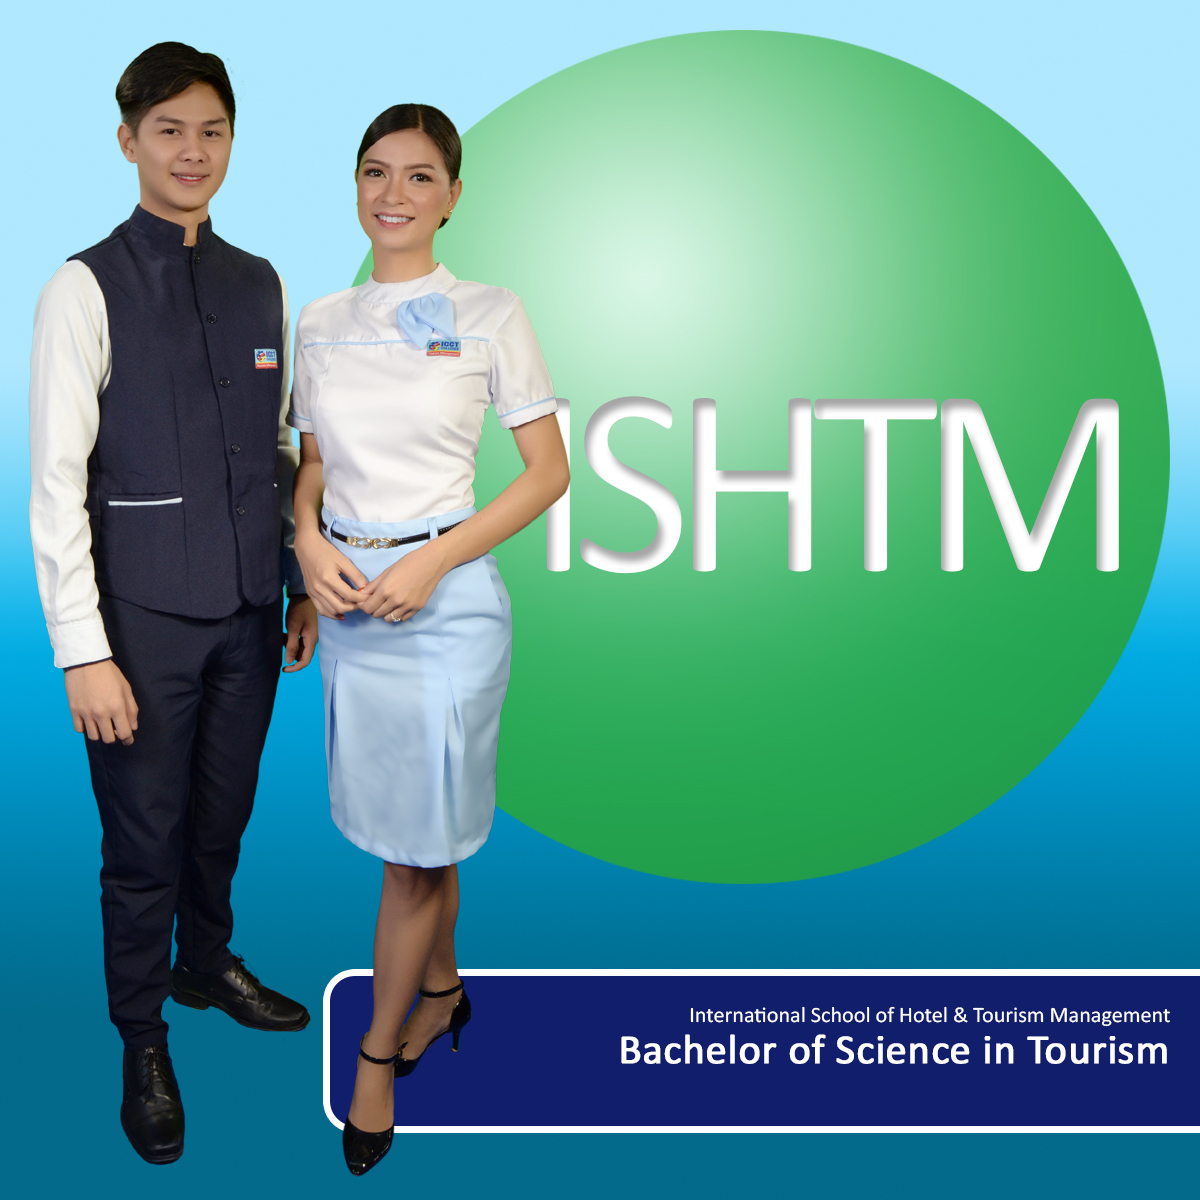 course units in tourism and hotel management